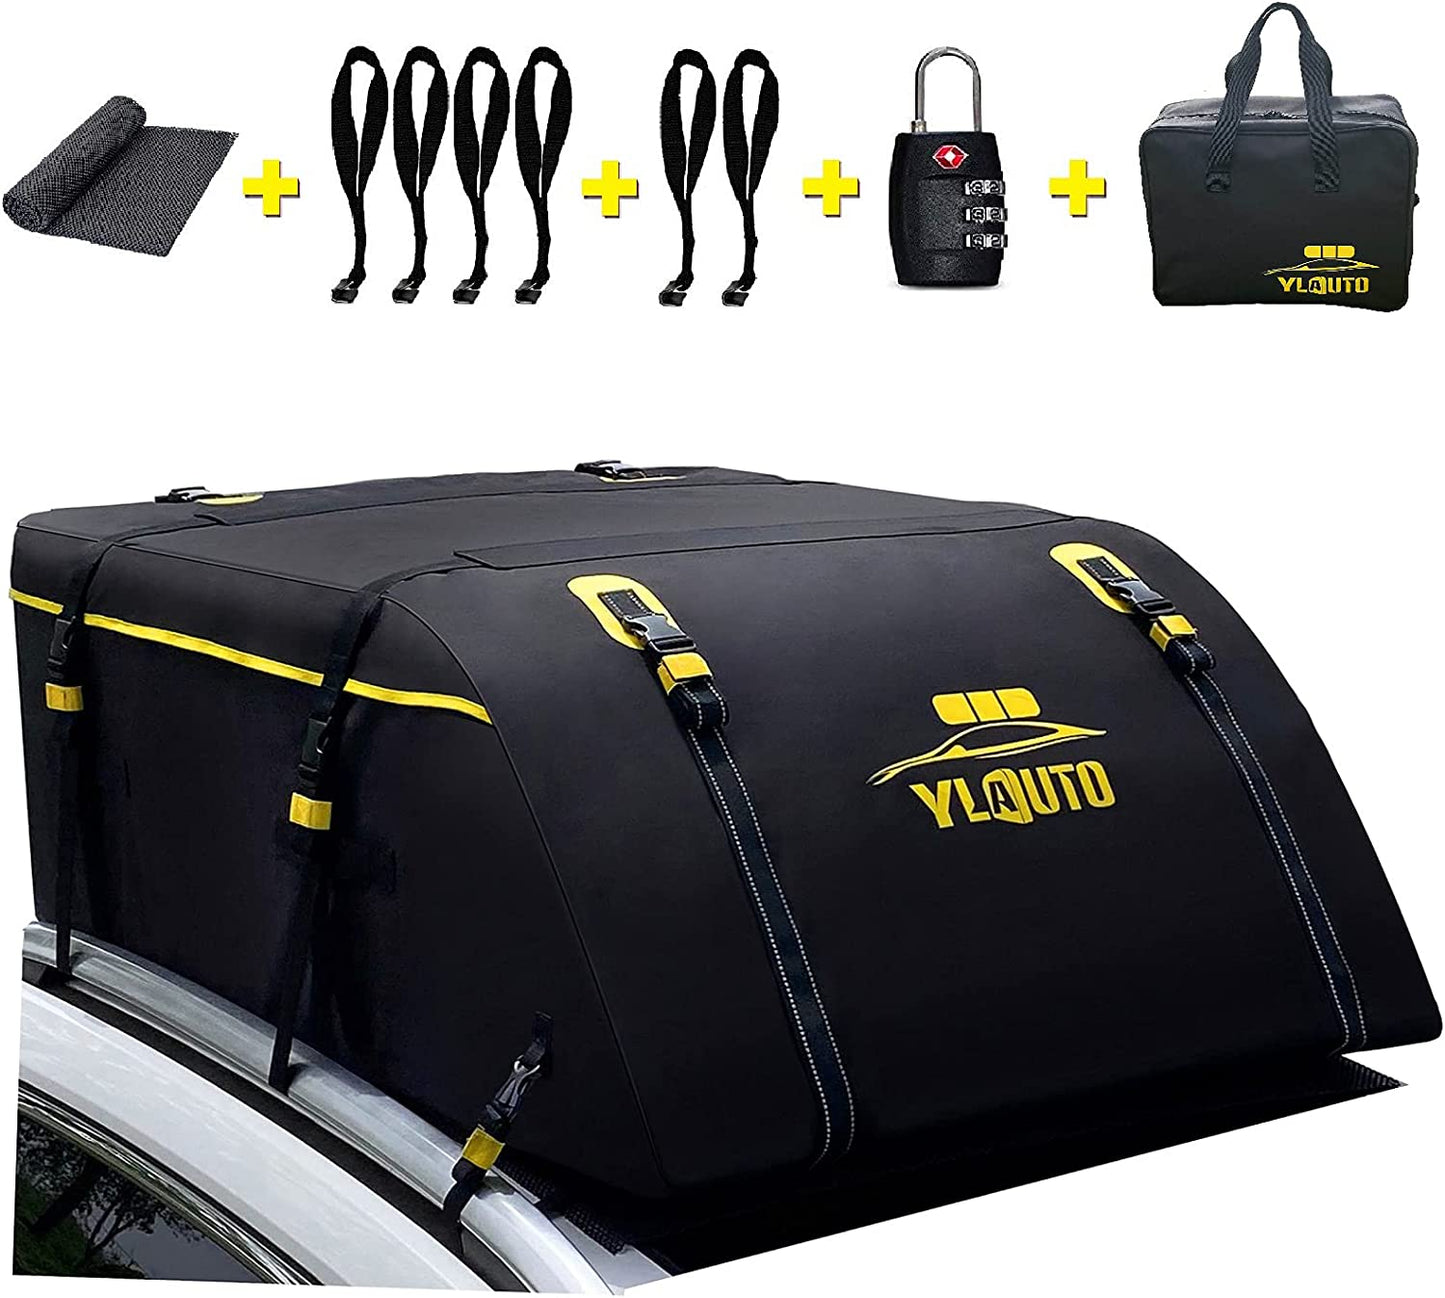 15 Expands to 20 Cubic Feet Aerodynamic Design Rooftop Cargo Bag,100% Waterproof Roof Luggage Bag, Rooftop Cargo Carrier with Anti-Slip Mat,Rooftop Car Bag Fits All Vehicle with/Without Rack